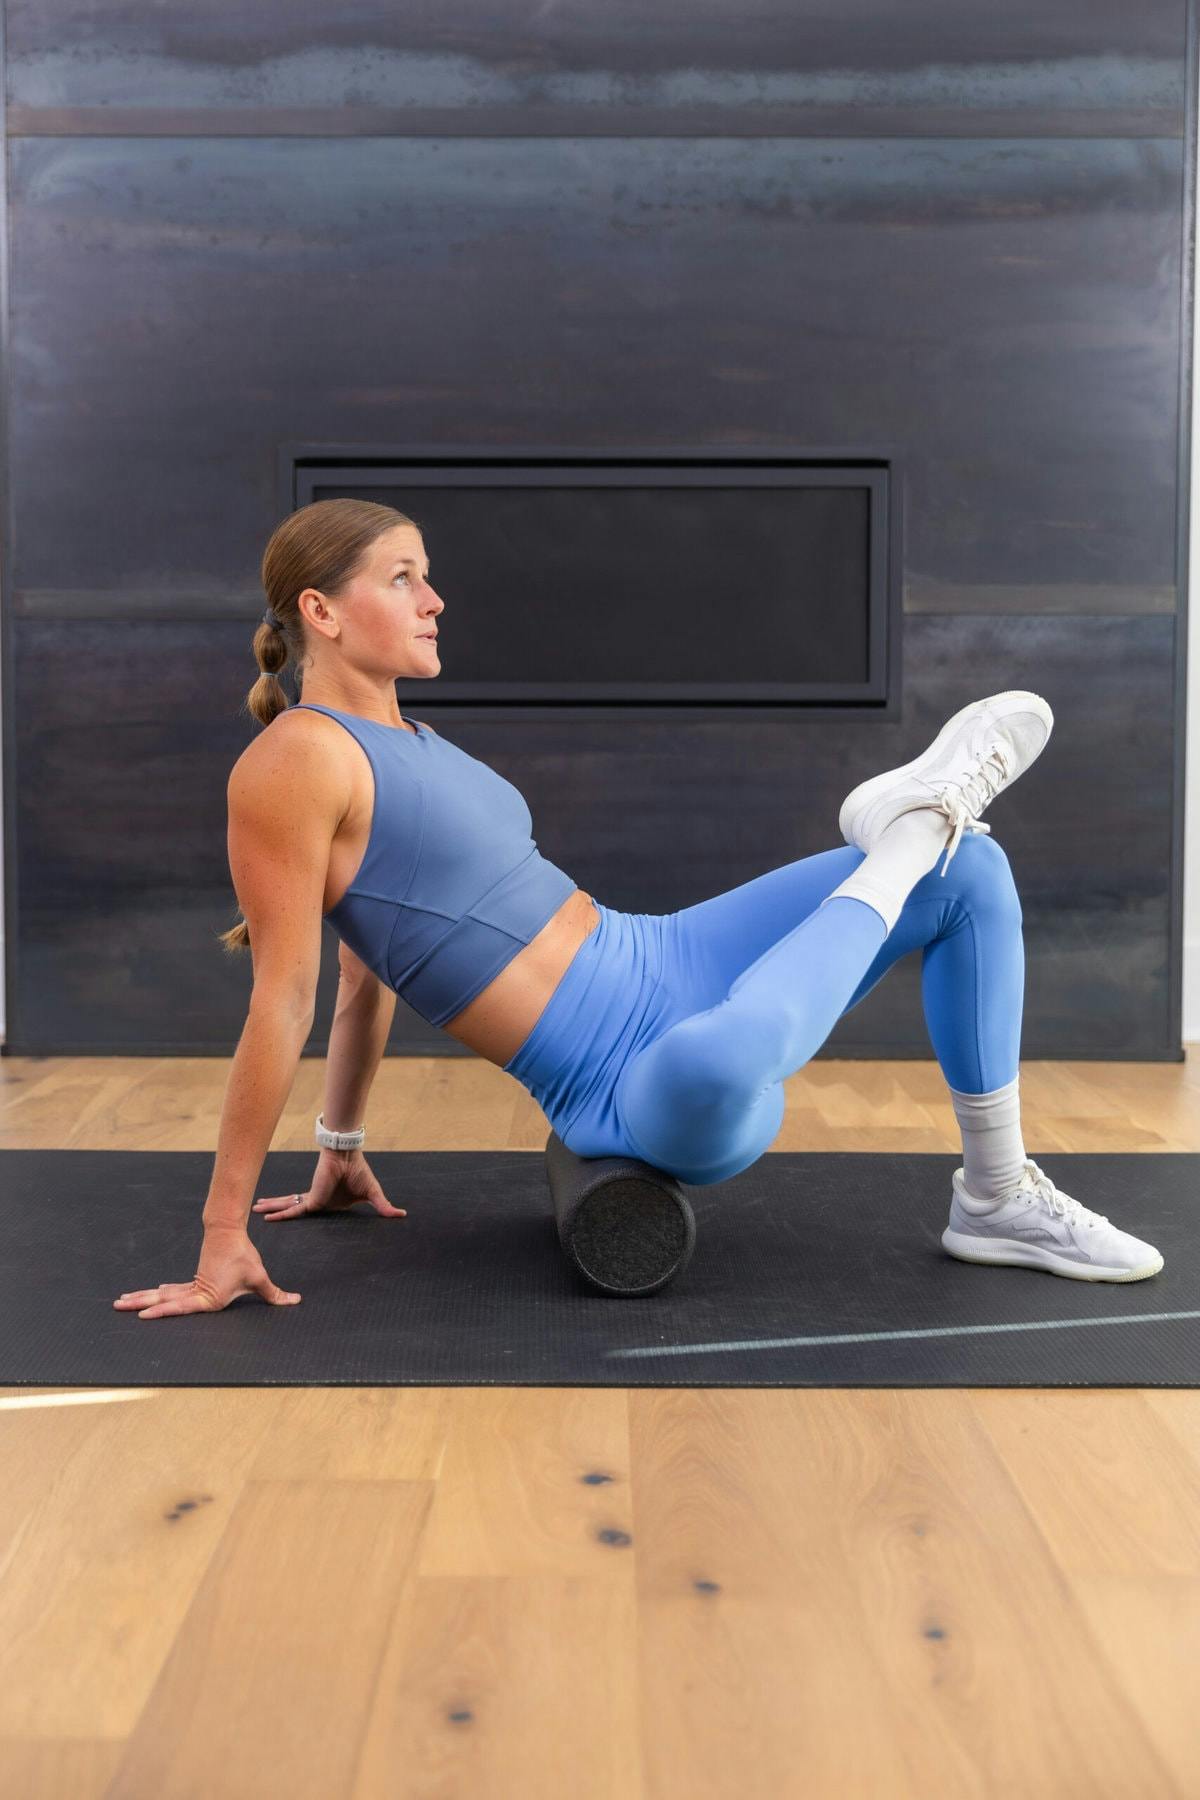 woman foam rolling as part of a muscle recovery routine